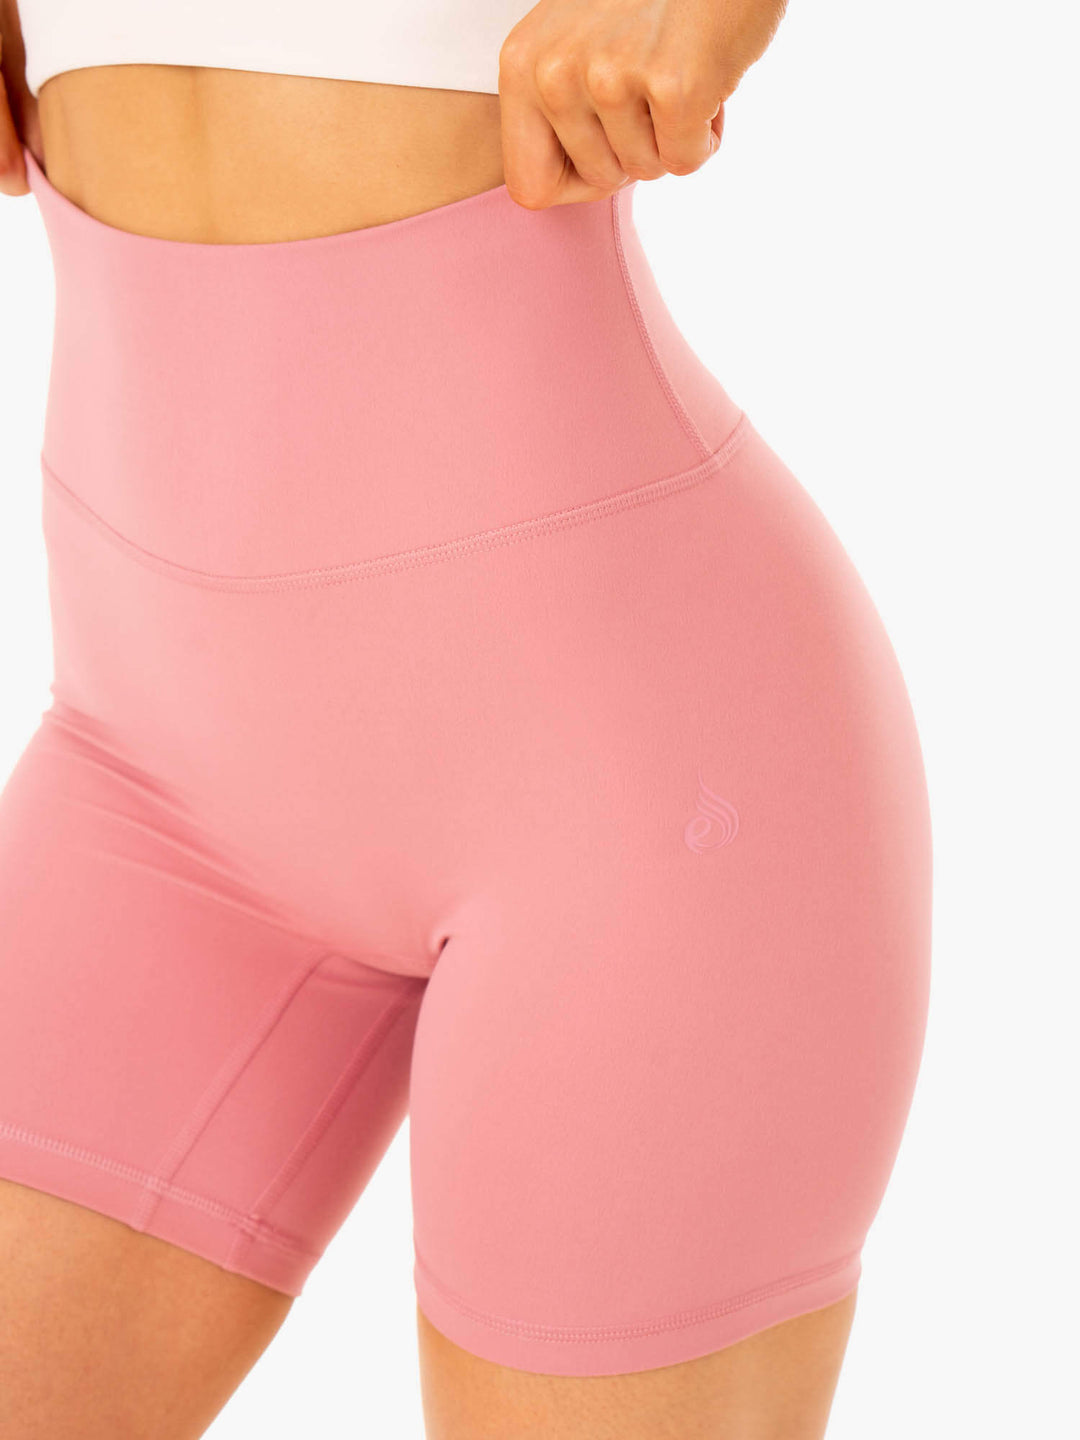 NKD Refine High Waisted Shorts - Dusty Pink Clothing Ryderwear 